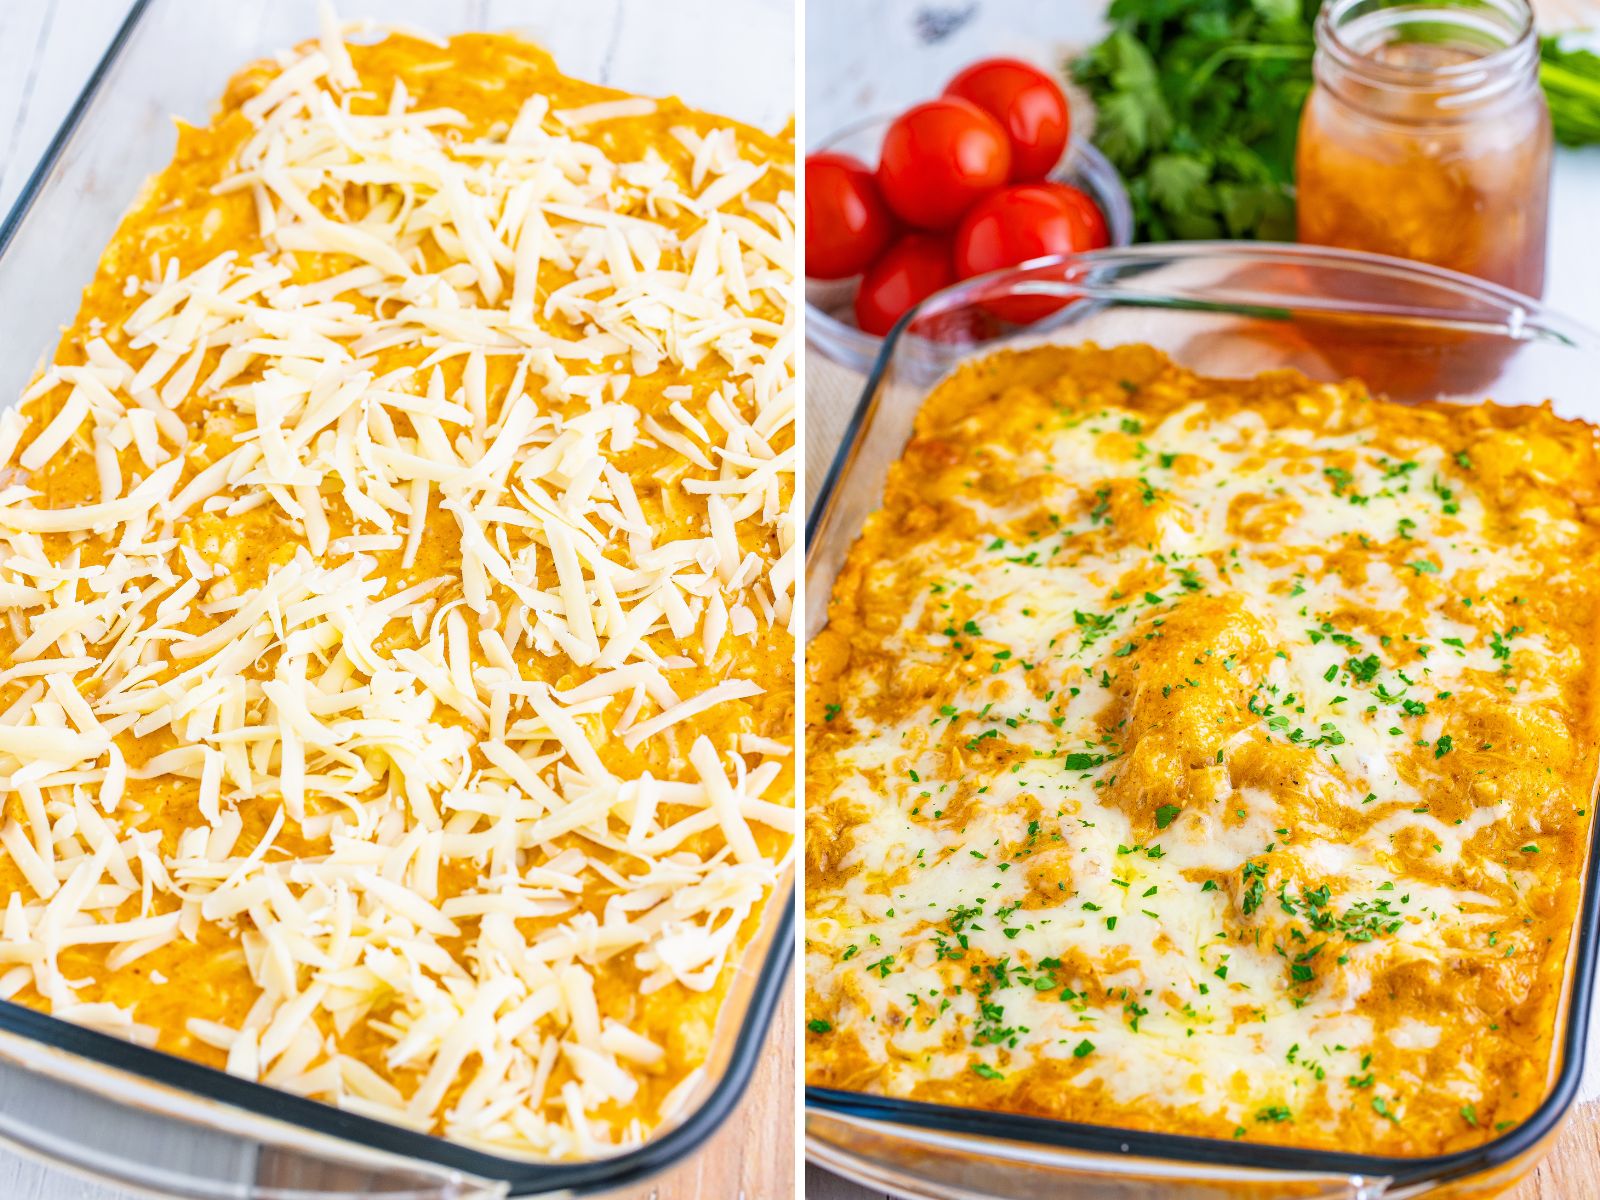 A cheese topped Enchilada Bake and a fresh out of the oven Chicken Enchilada Bake in a baking dish.